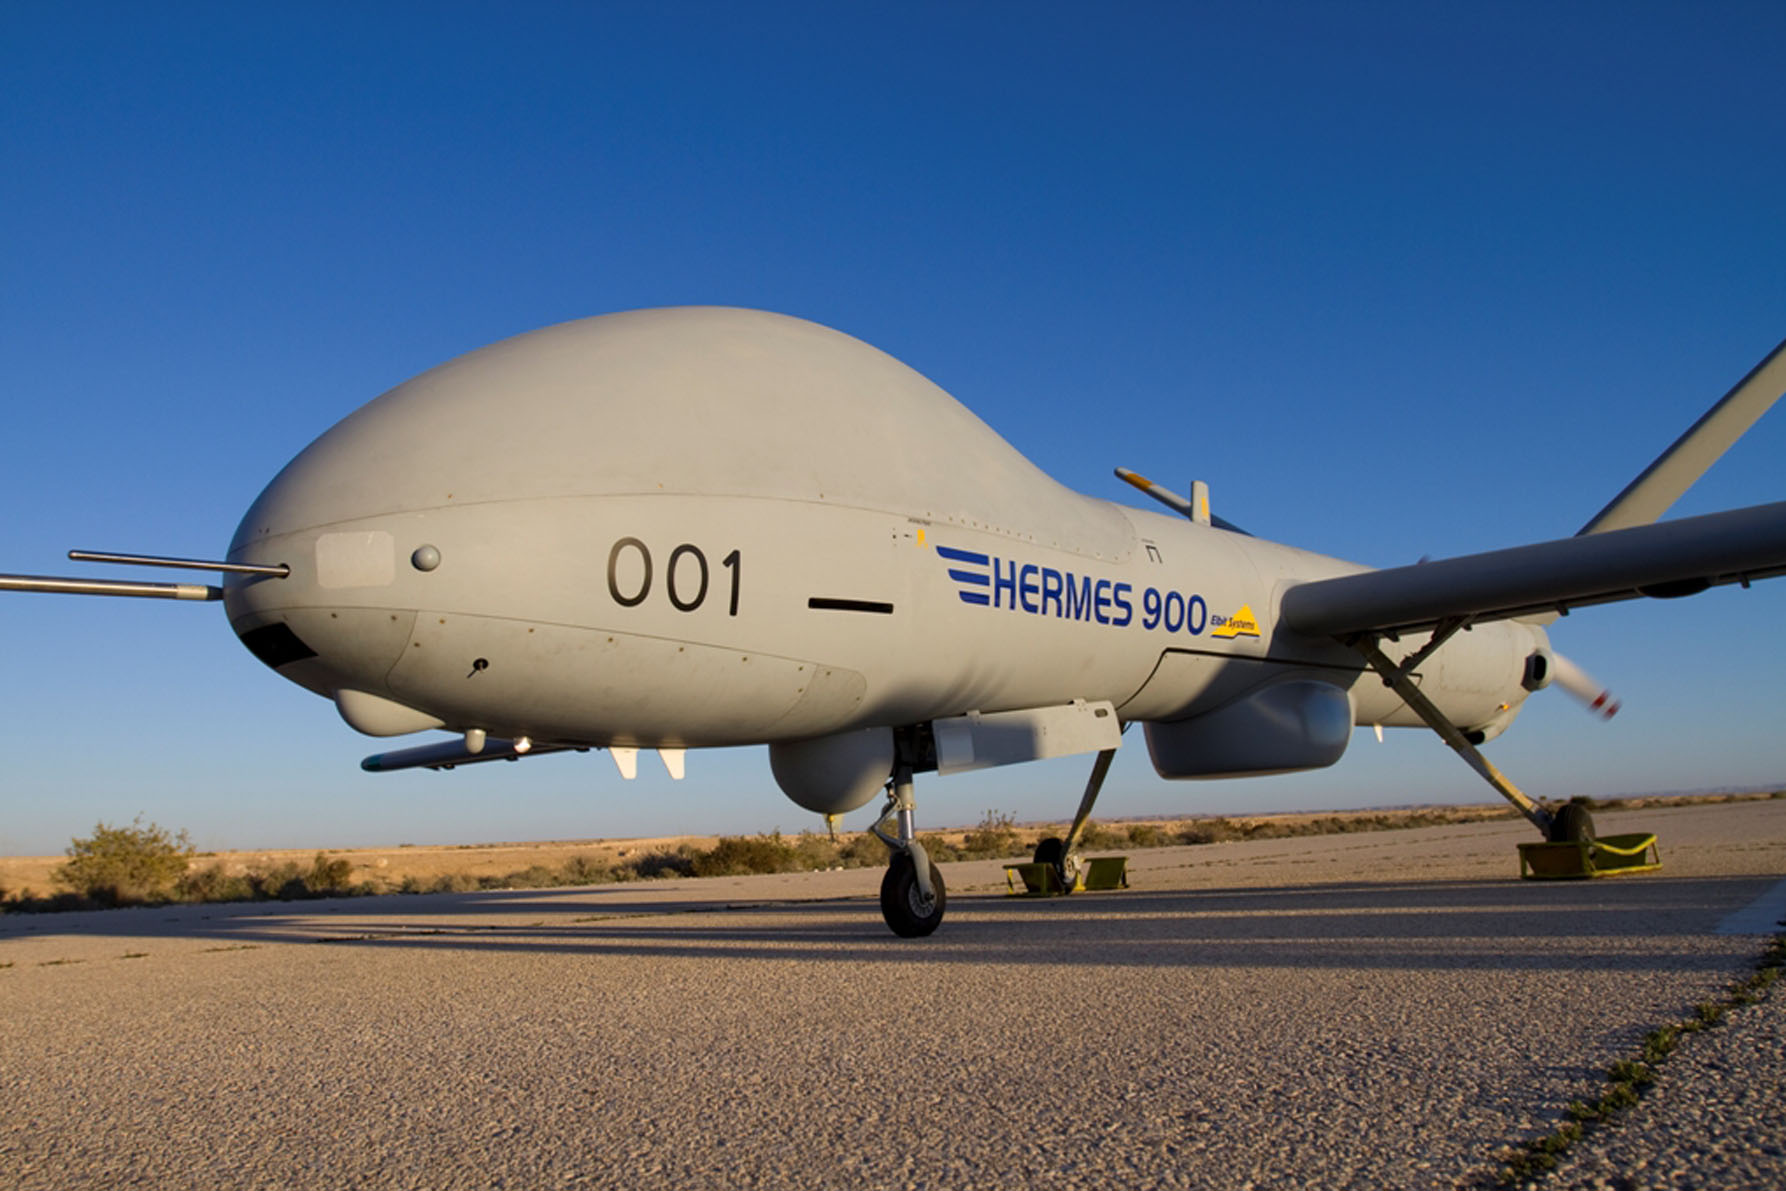 Switzerland shows for the first time Hermes 900 Starliner drones that can be equipped with air-to-ground missiles